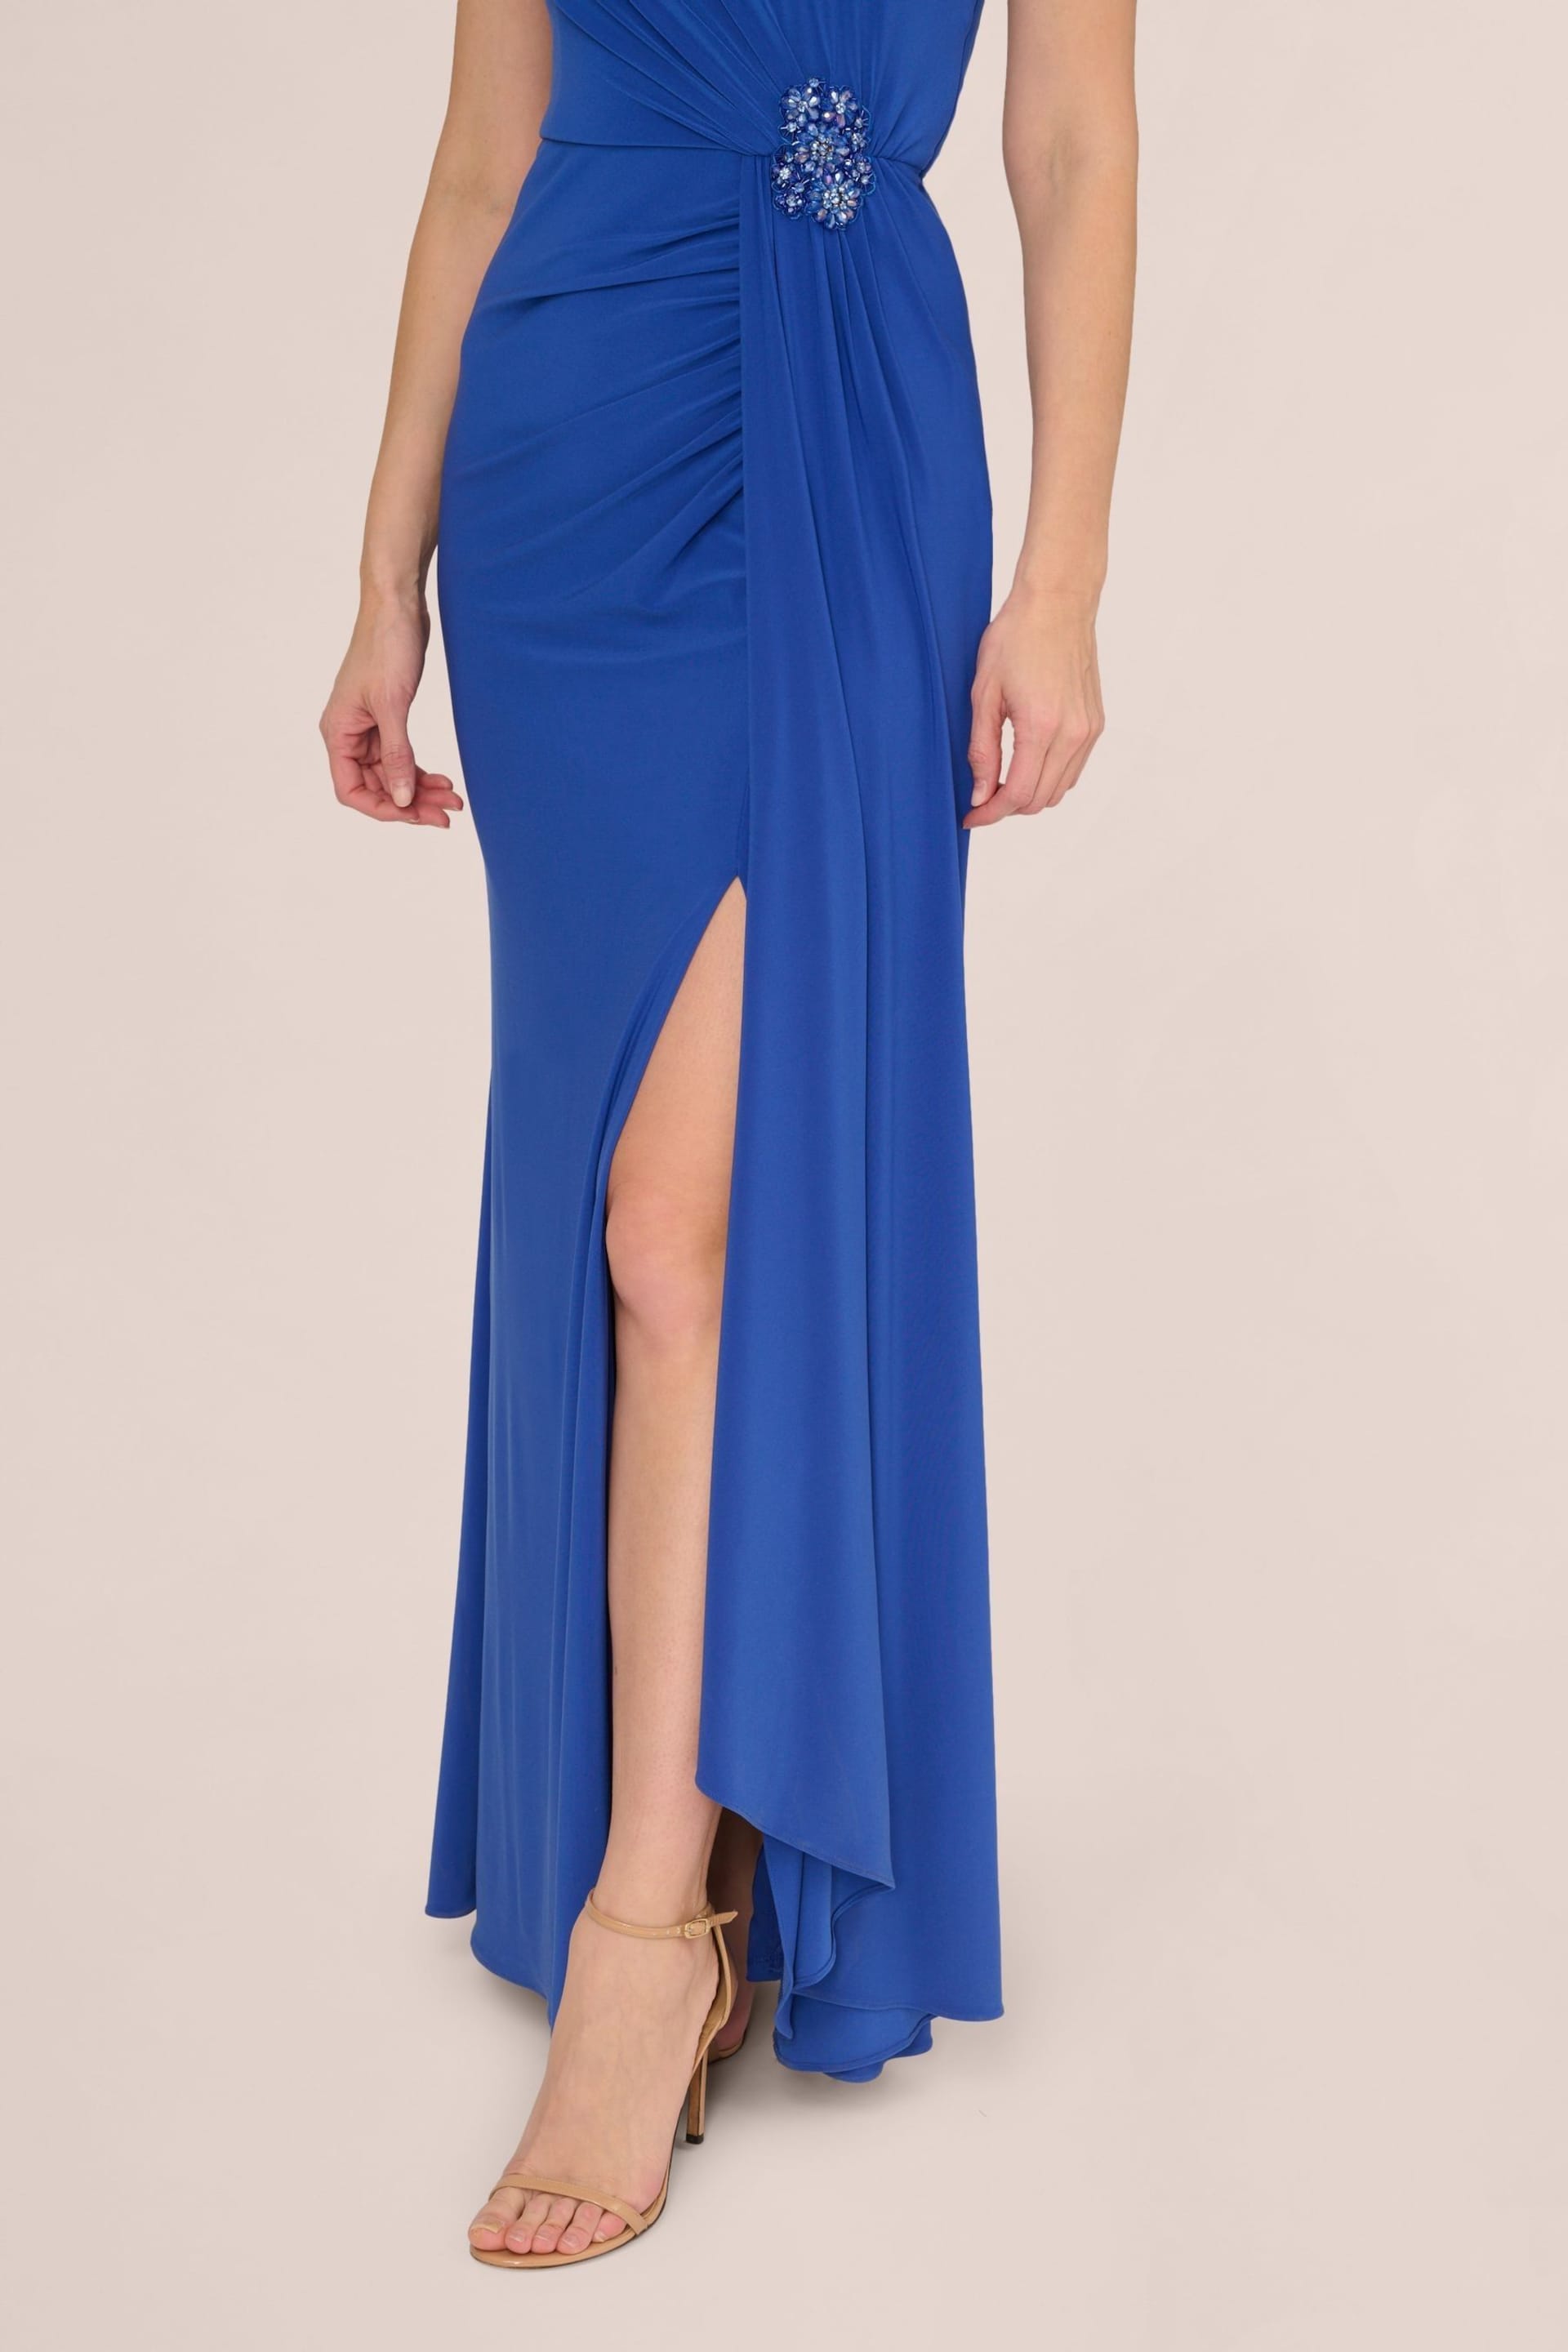 Adrianna Papell Blue Jersey Evening Gown - Image 5 of 7